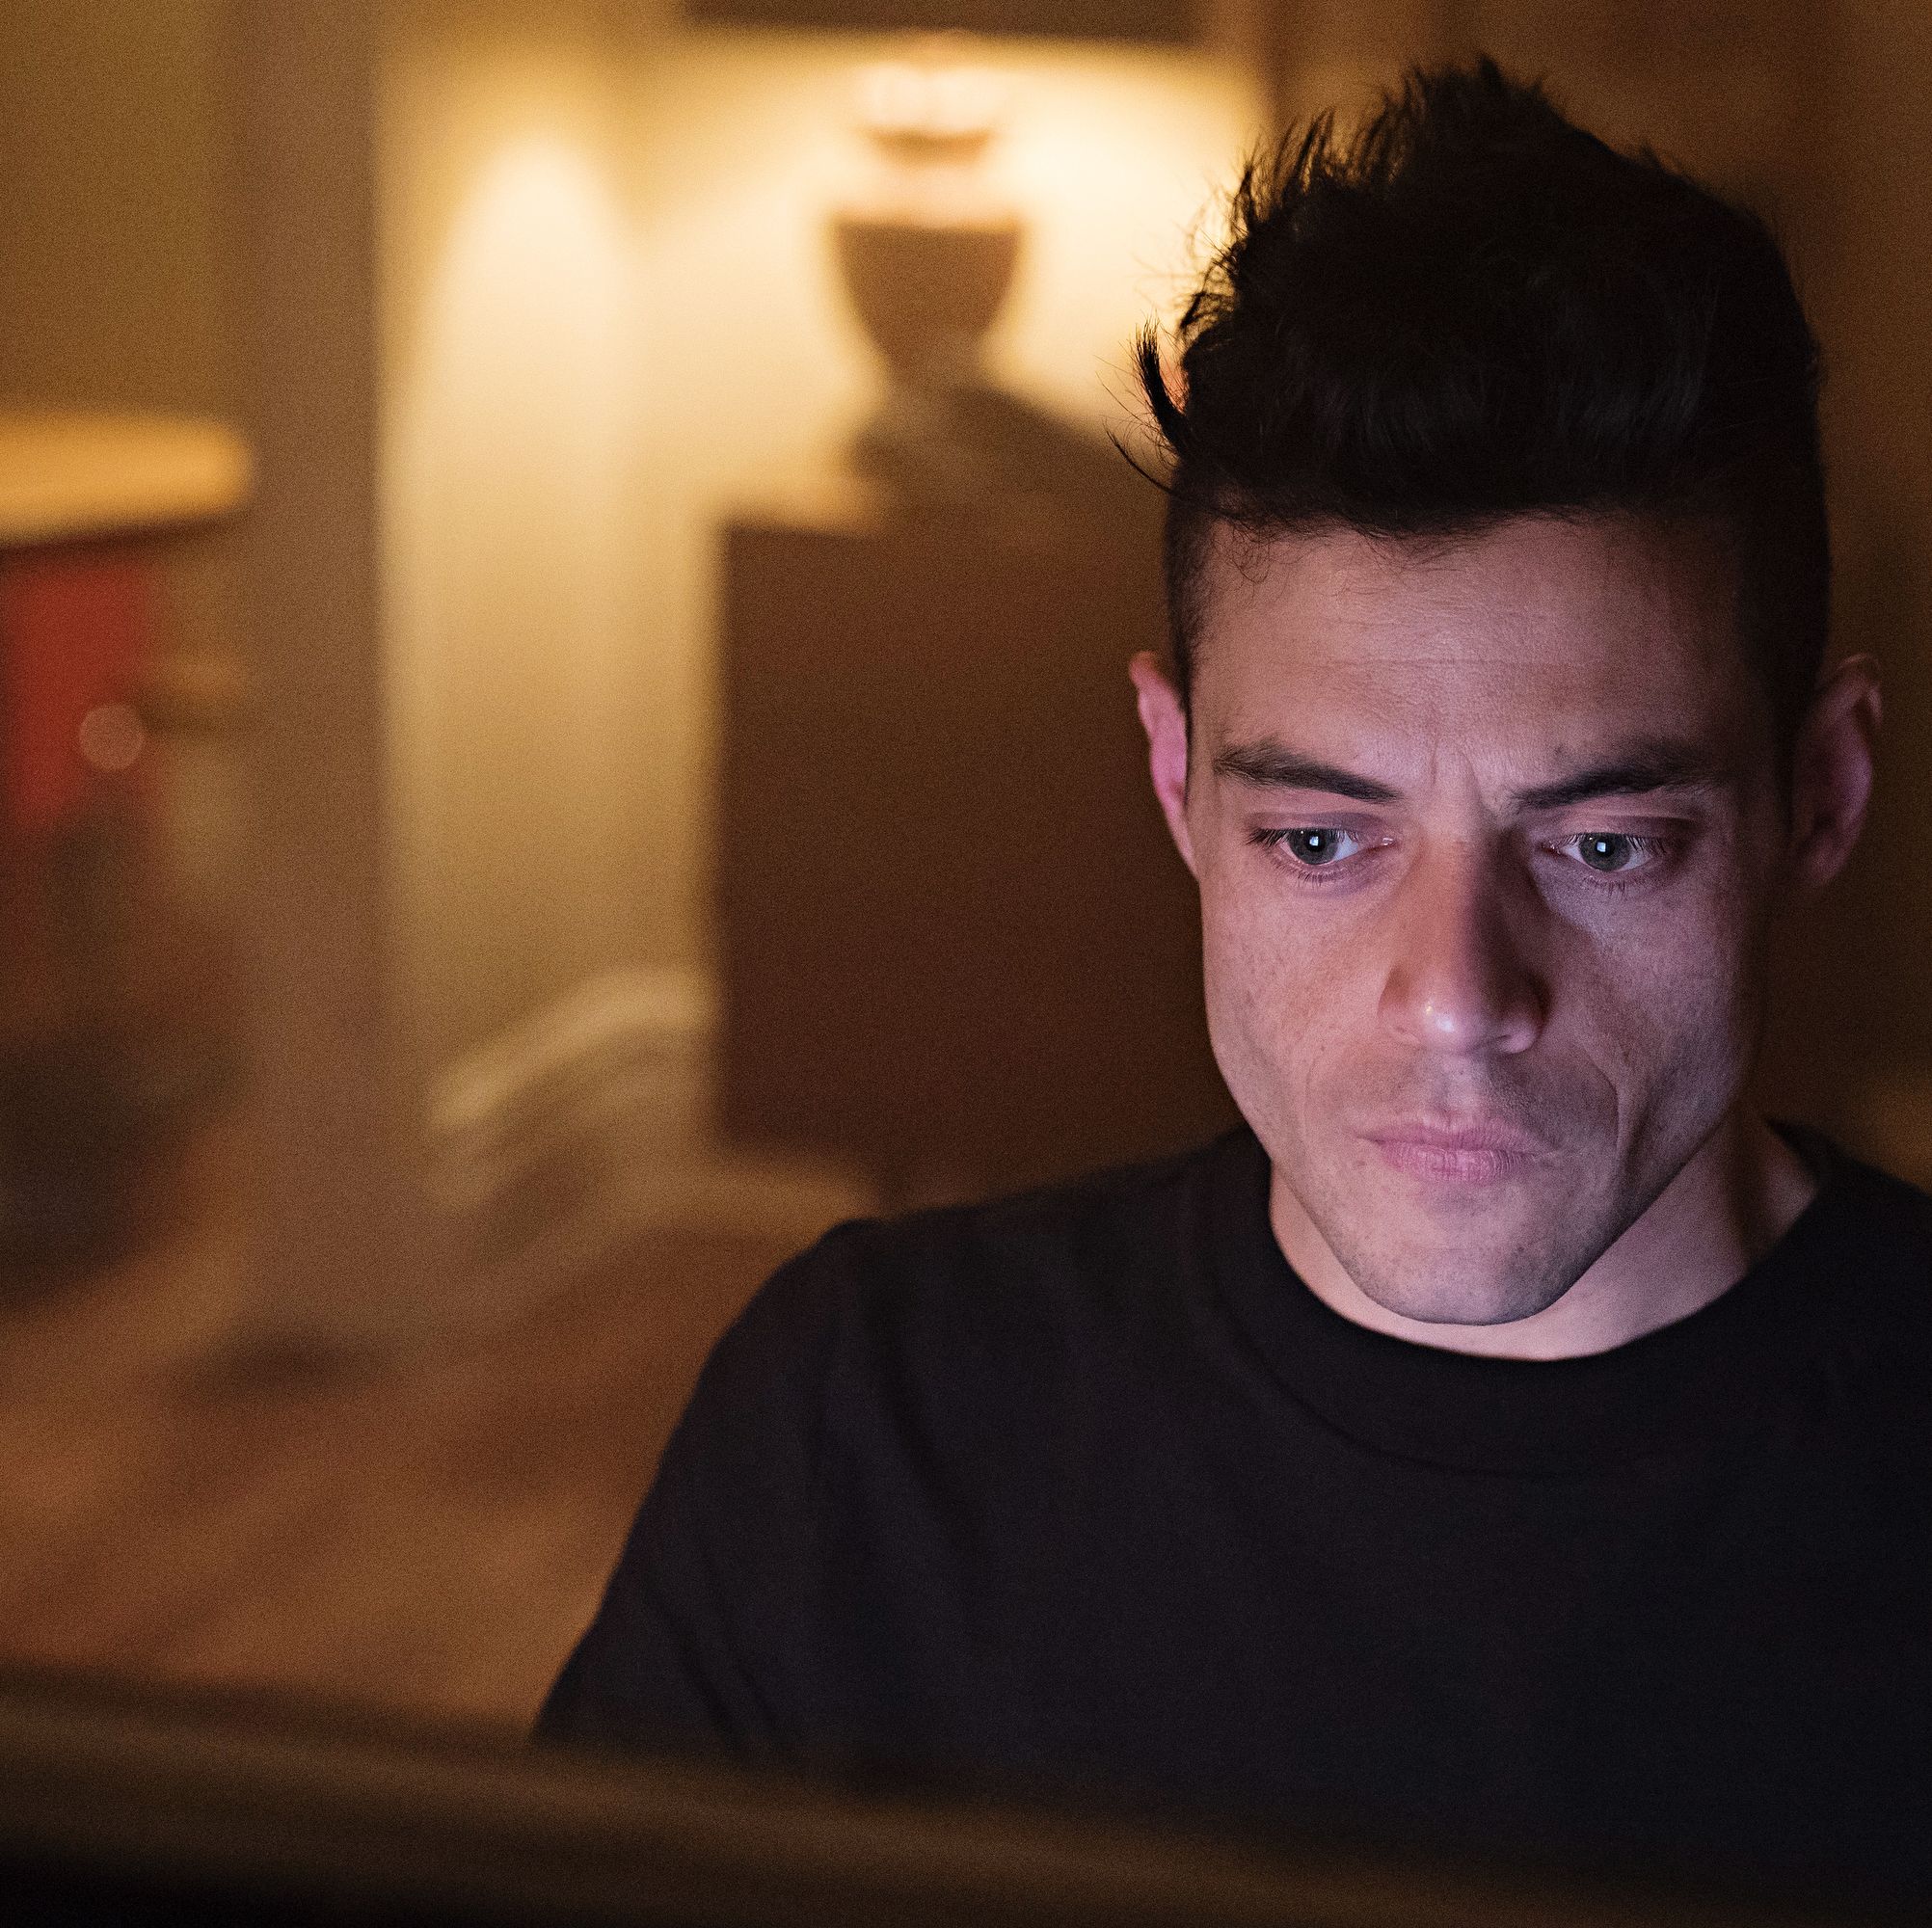 Mr. Robot' to Officially End With Season 4